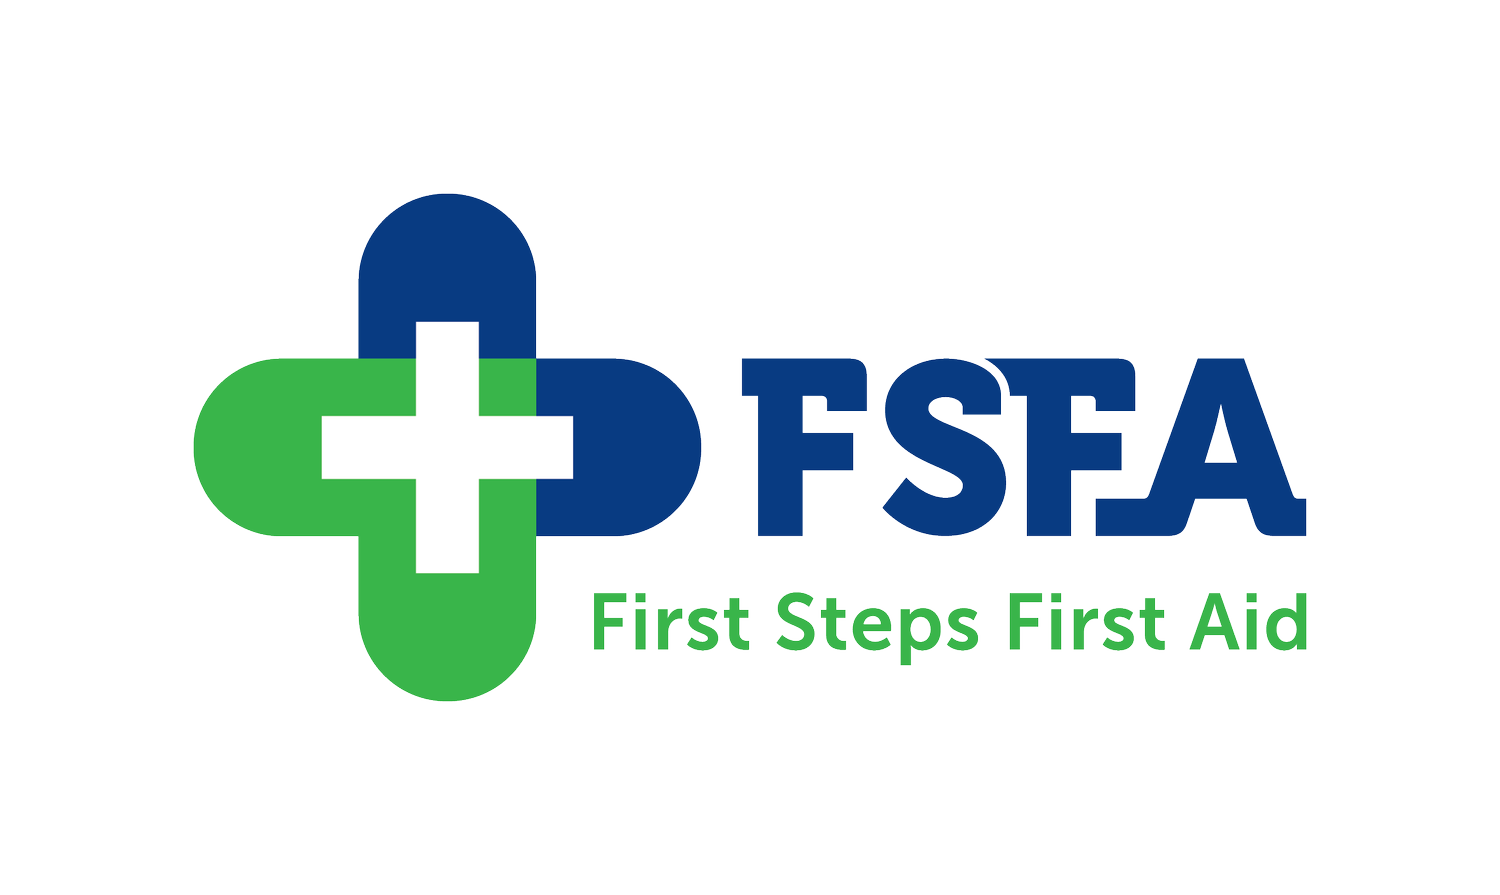 First Steps First Aid